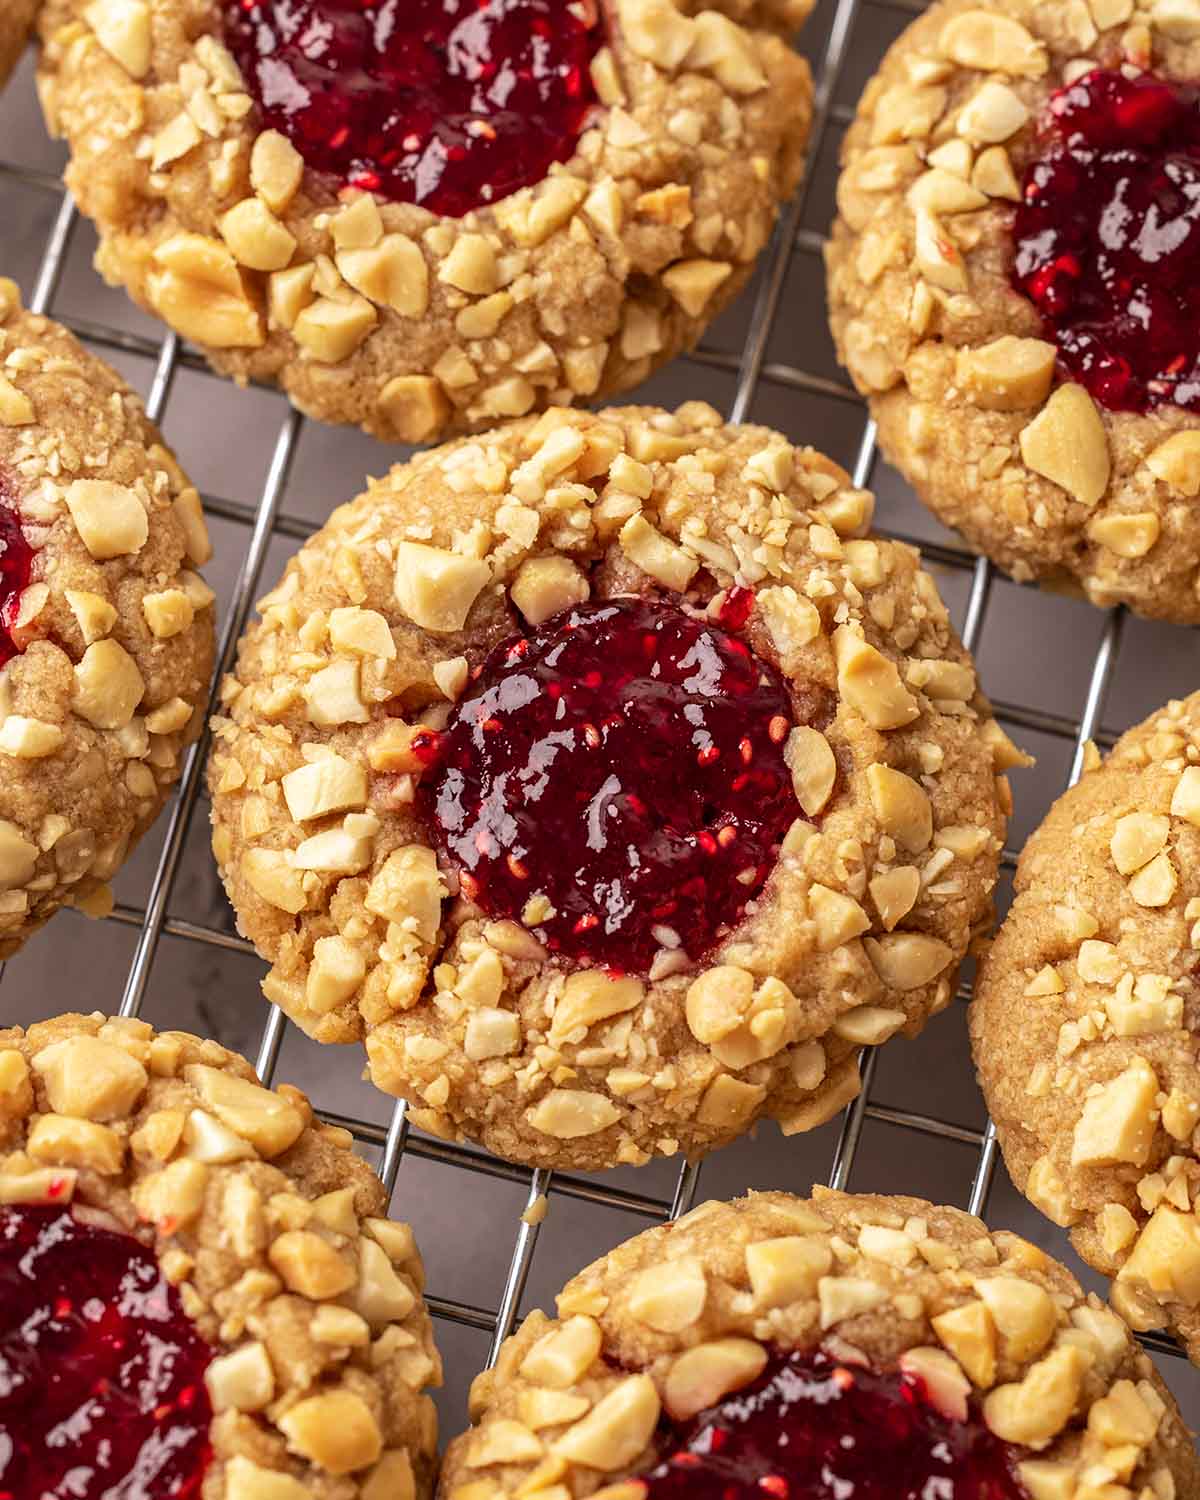 Close up of peanut butter jelly cookies on cooling rack. Each cookie is coated in chopped peanuts and has a thumbprint filled with red jam.